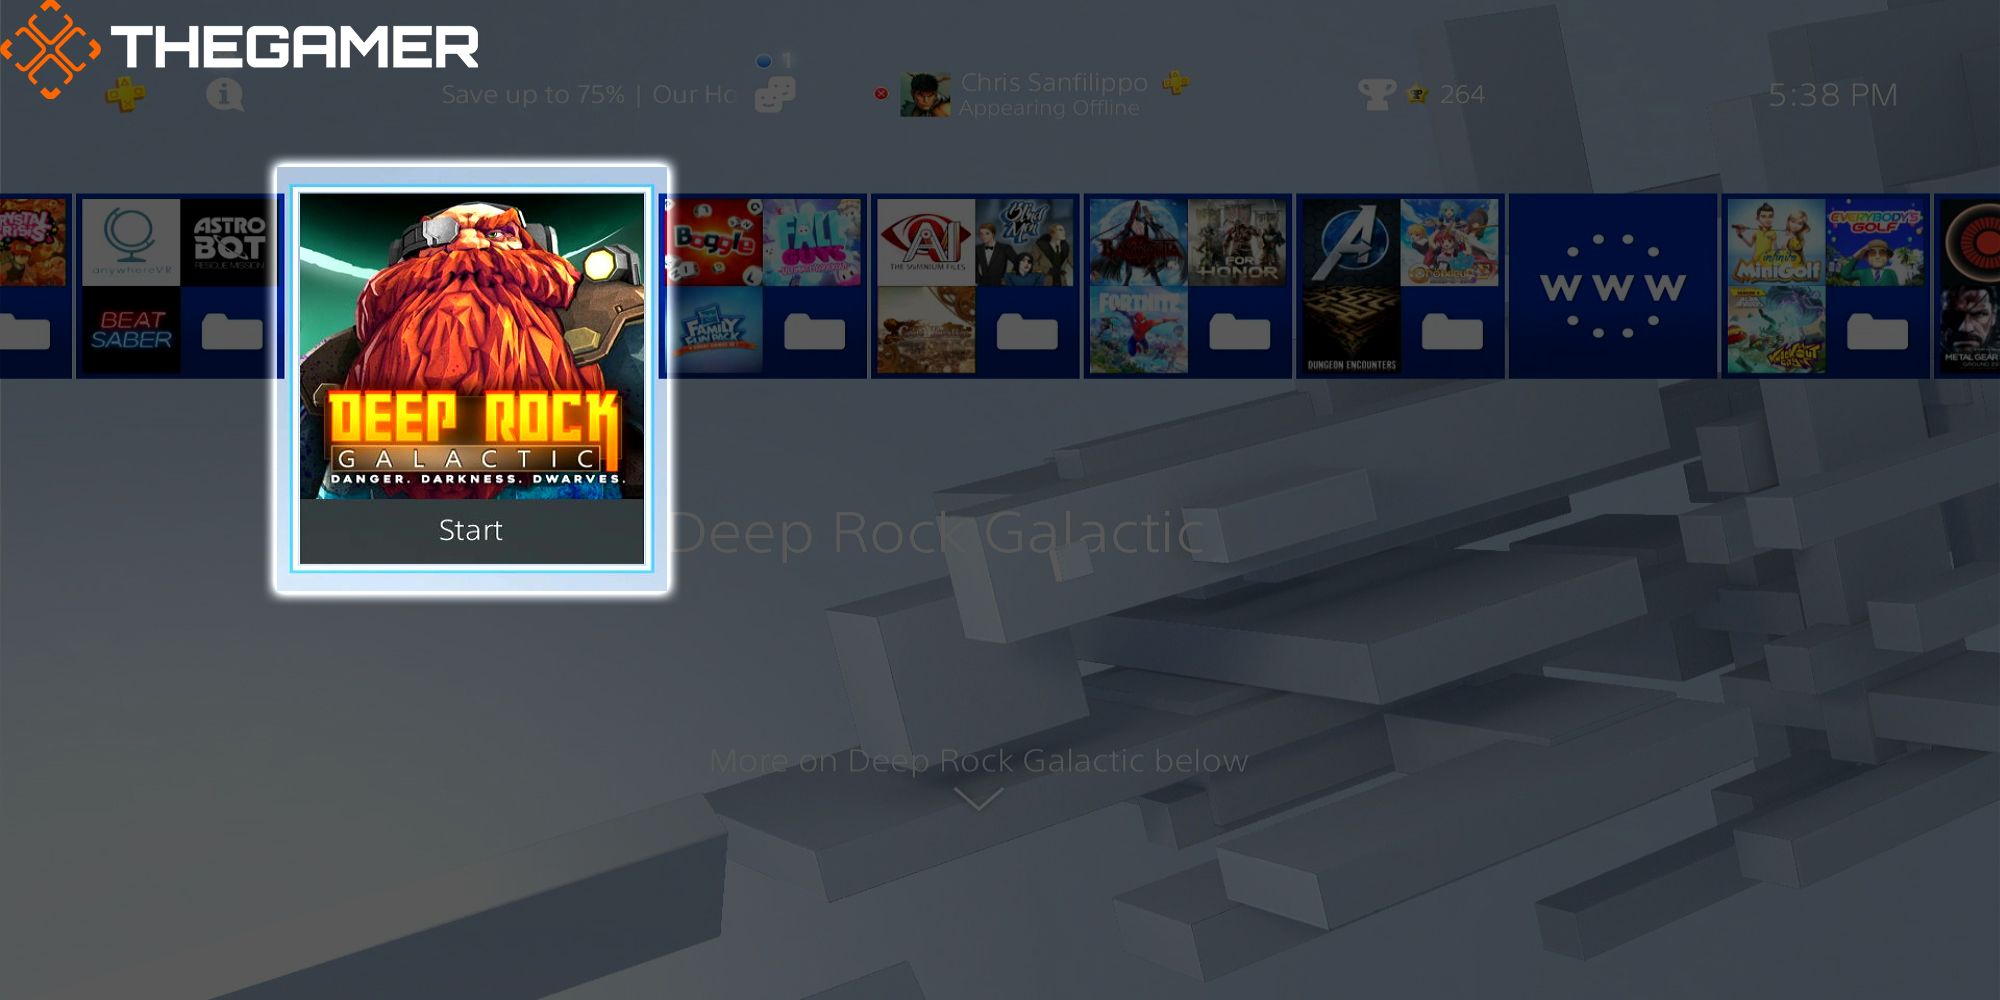 The Deep Rock Galactic Start Icon, between the VR Games and Board Games Folders in Chris's Sad PS4 Home Page.